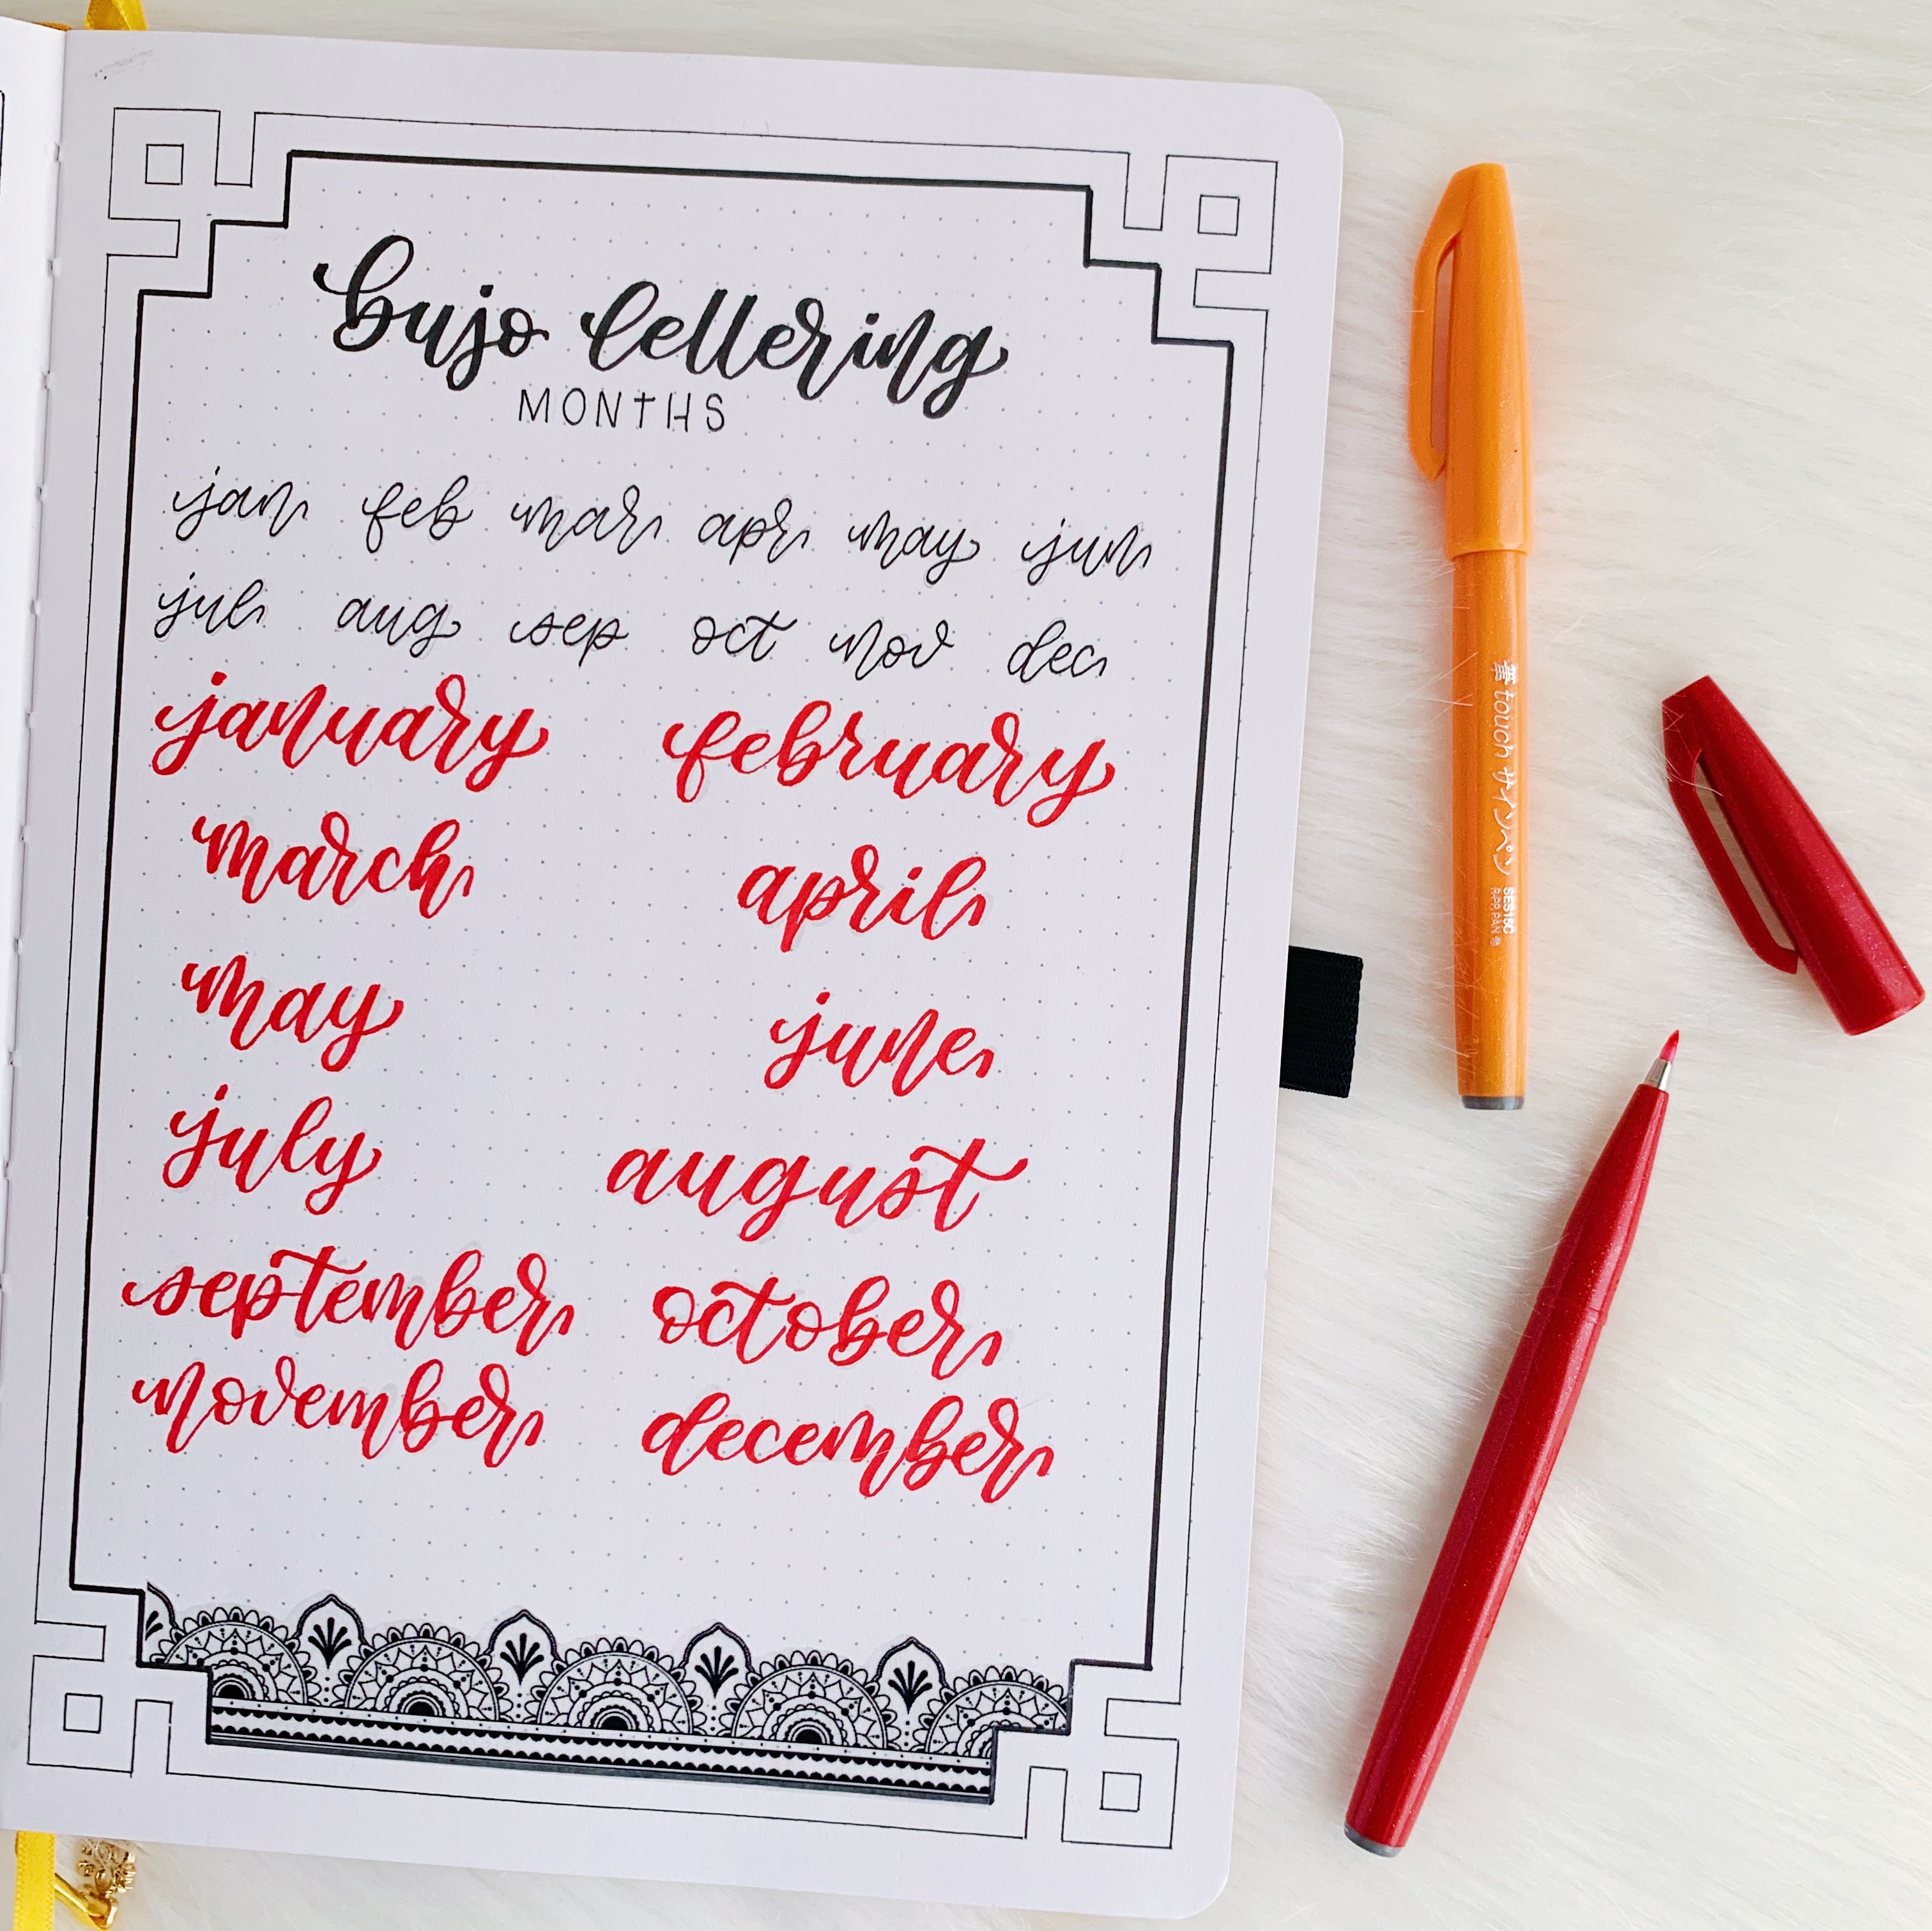 Hand Lettering Tutorial For Each Month In Your Bullet Journal